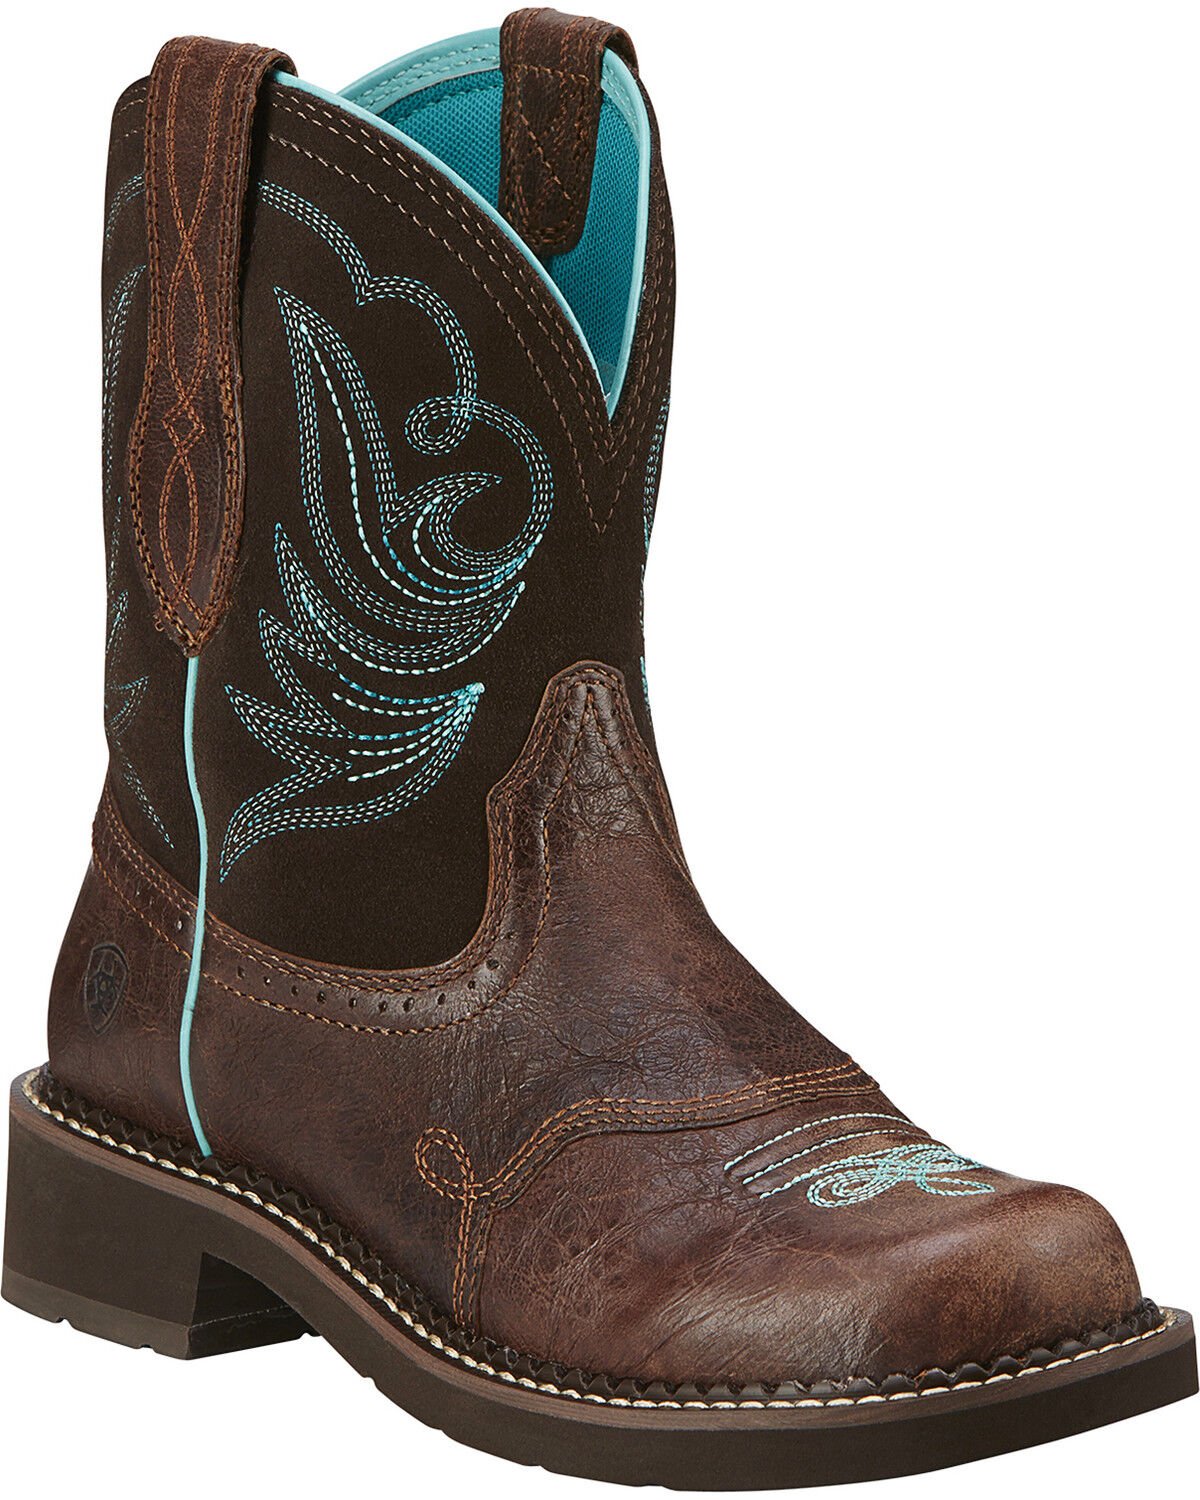 ariat women's boots on sale